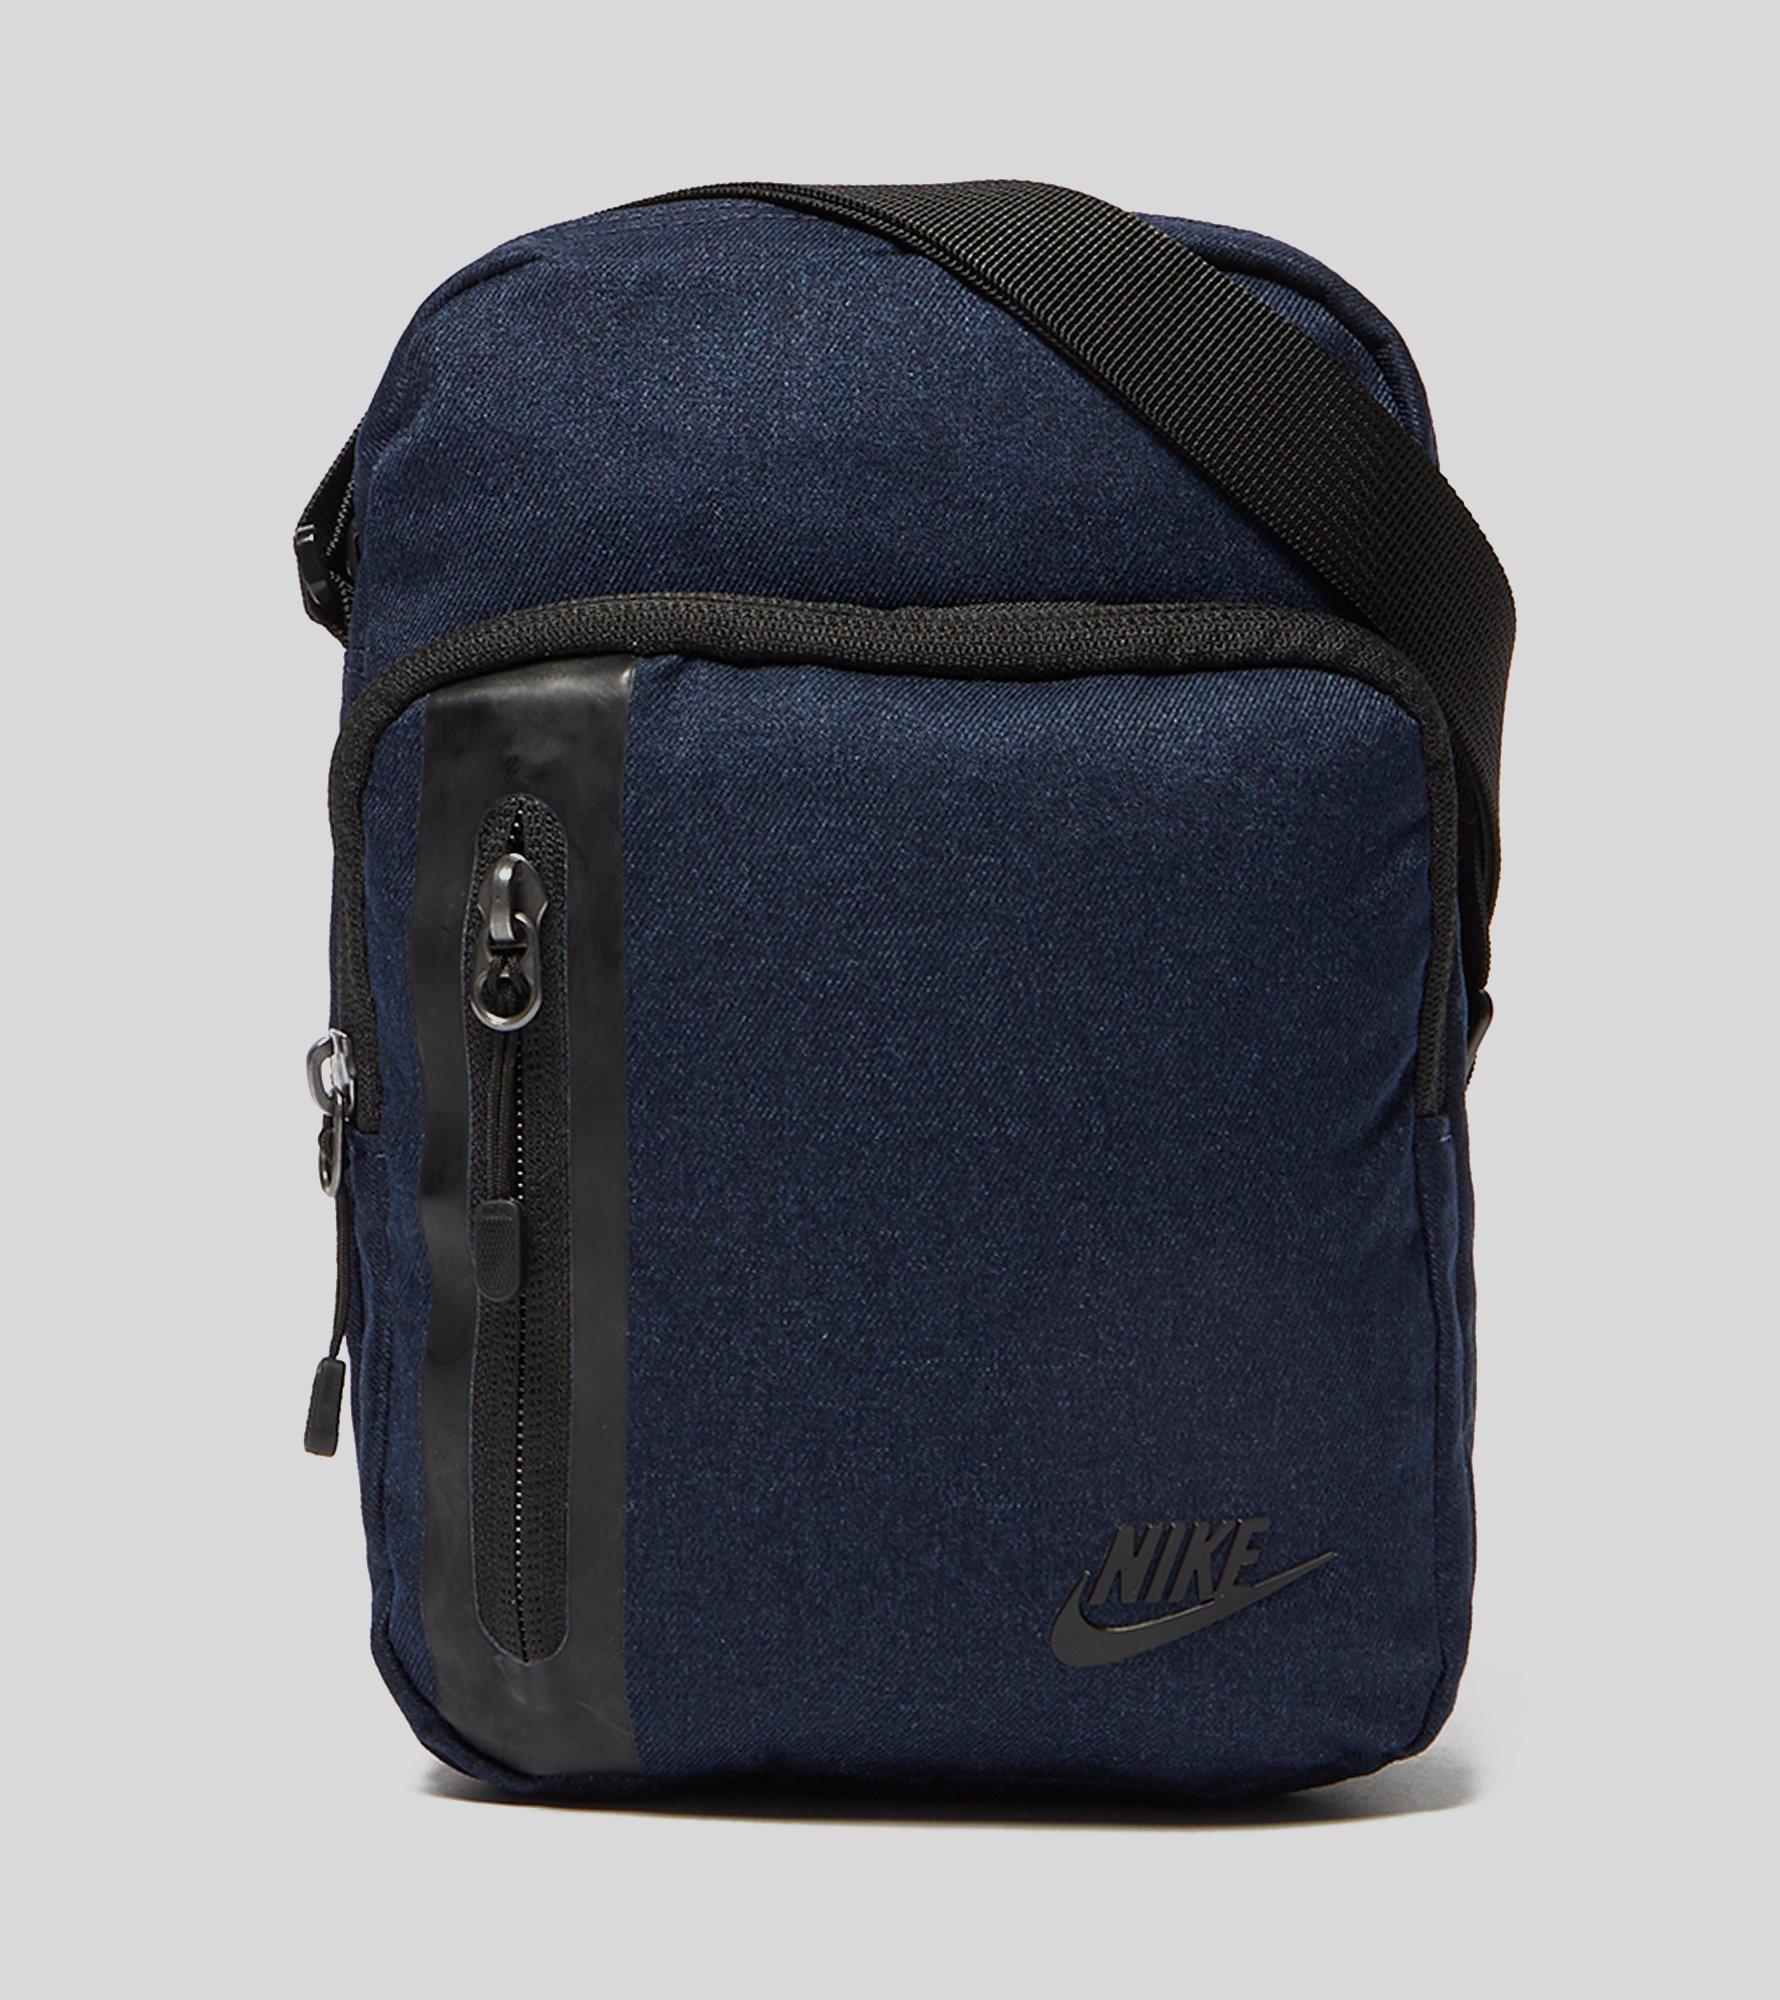 Nike Synthetic Core Small Items 3.0 Bag in Blue for Men - Lyst